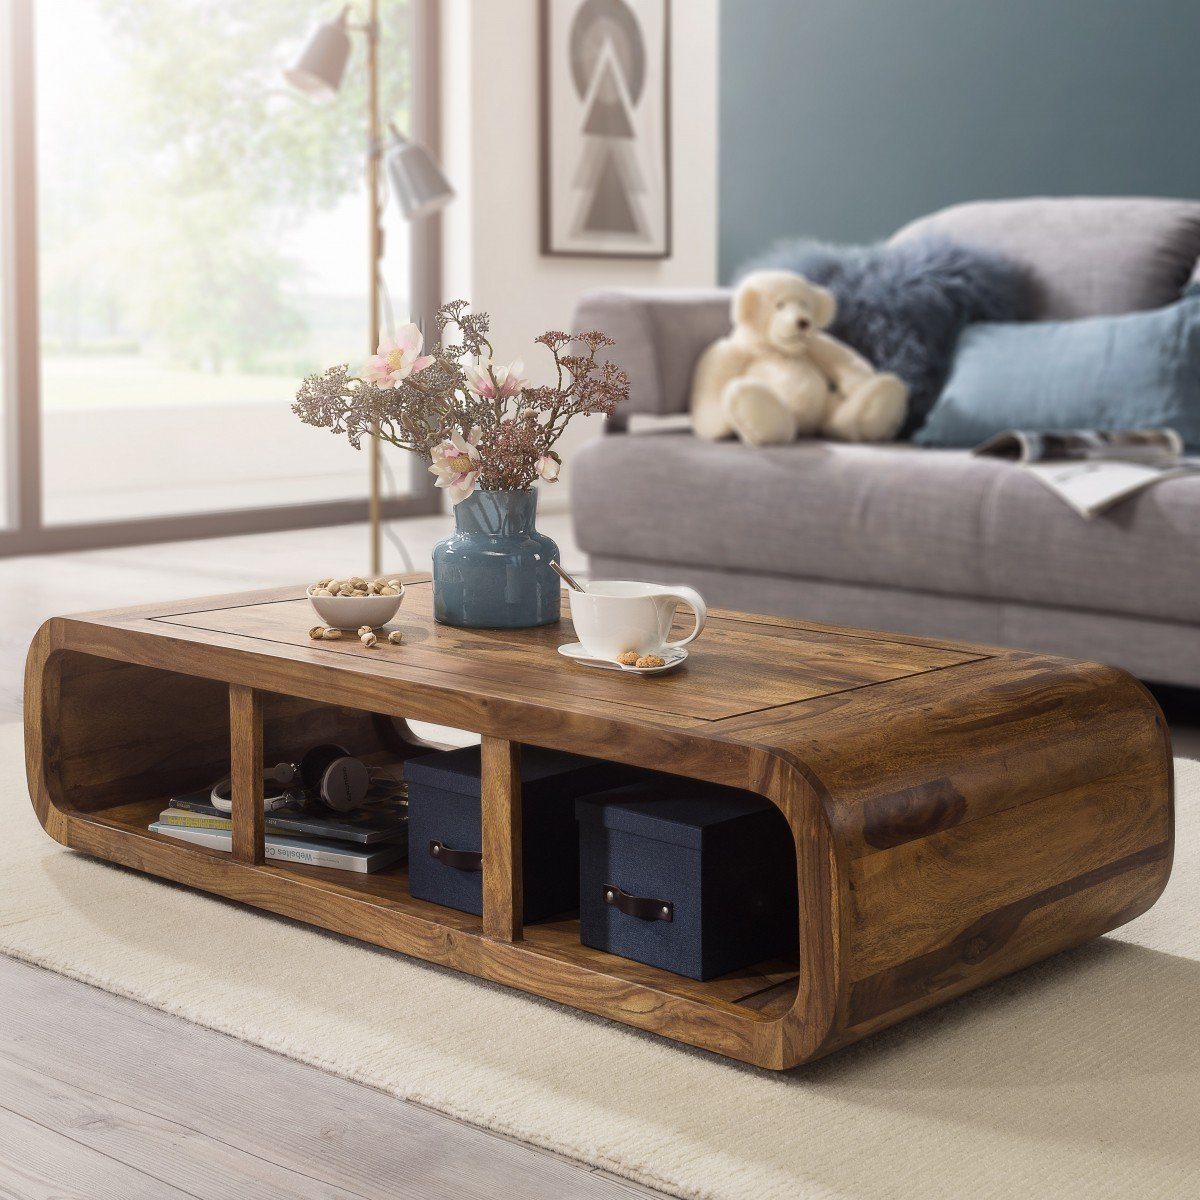 Buy Solid Wood Curved Coffee Table Online | New Launches ...